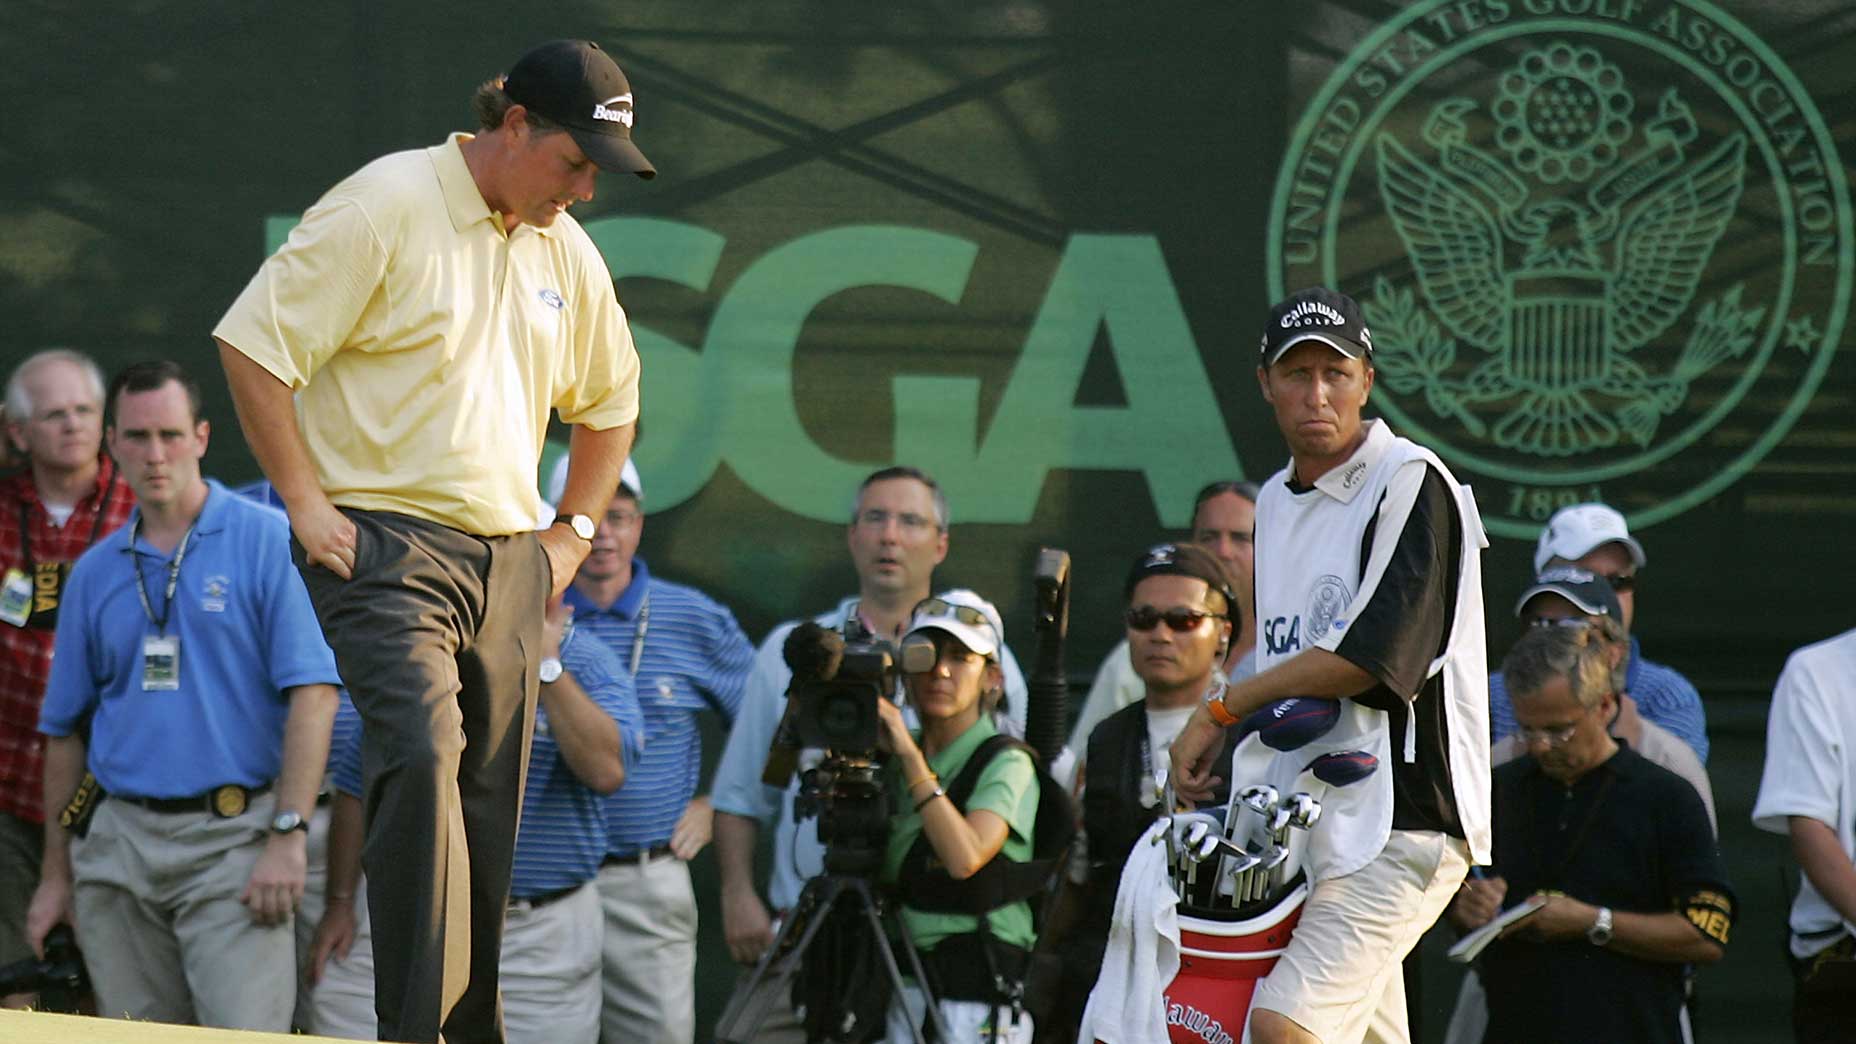 For Phil Mickelson and the US Open, there may not be a perfect ending